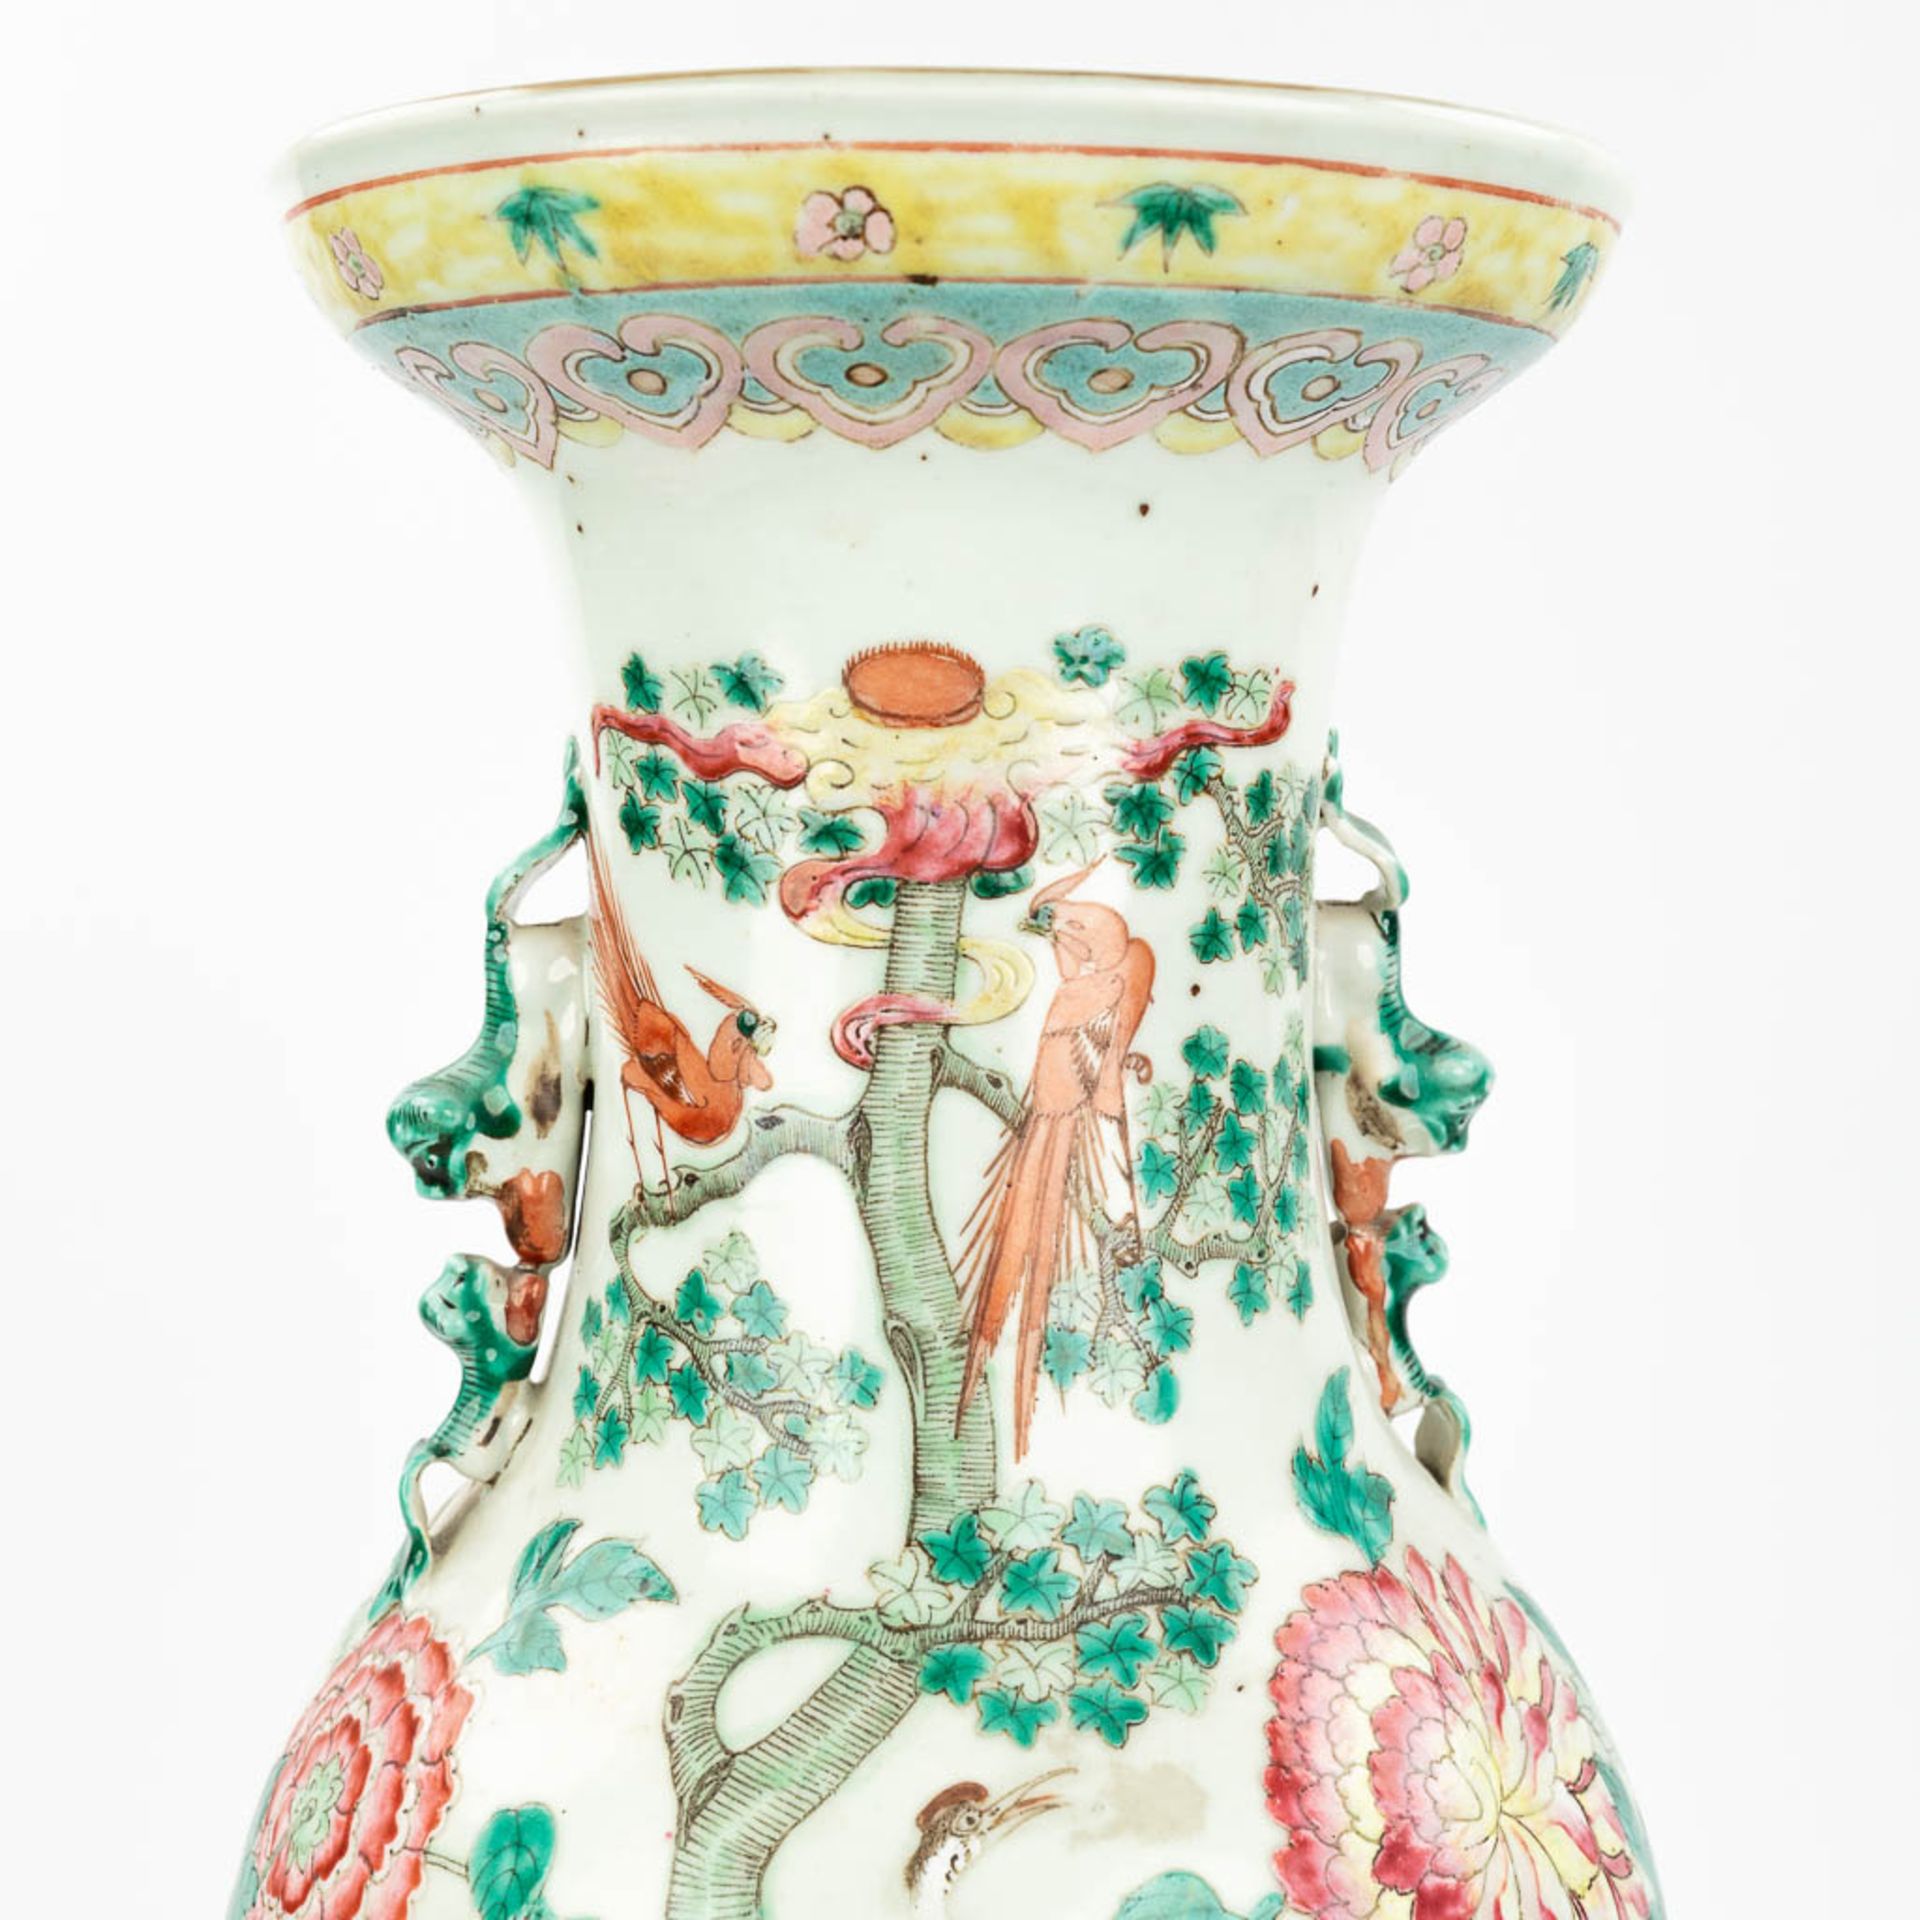 A Chinese vase made of porcelain, decorated with peacocks and birds. (61,5 x 24 cm) - Image 14 of 18